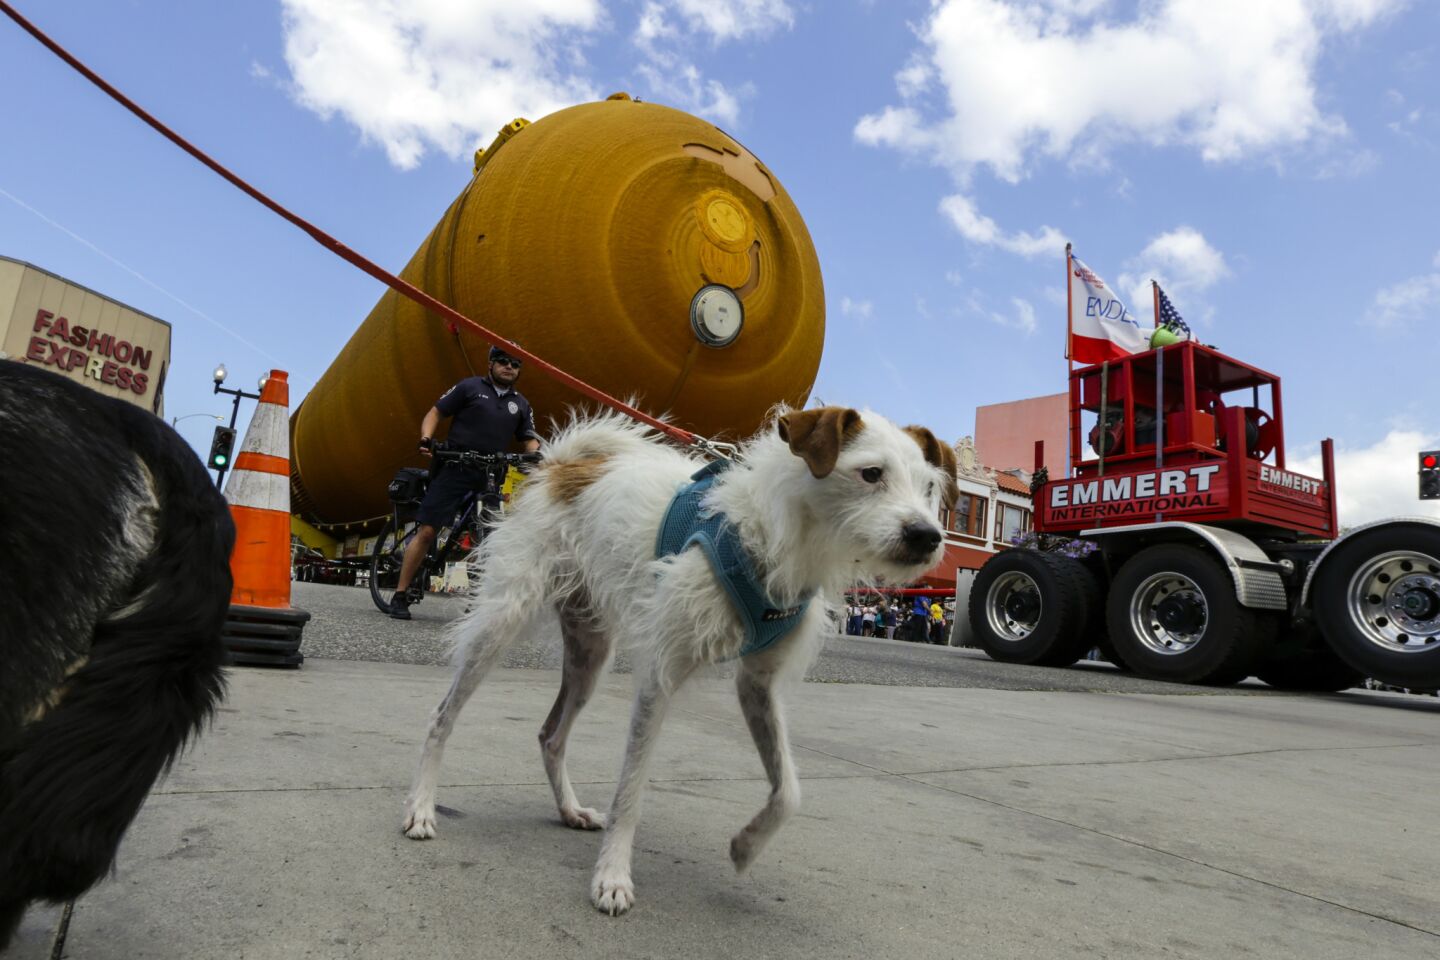 Kirby the dog appears to be escorting ET-94, NASA's last remaining space shuttle external tank, which is traveling on Manchester Avenue in Inglewood on its way to the California Science Center.